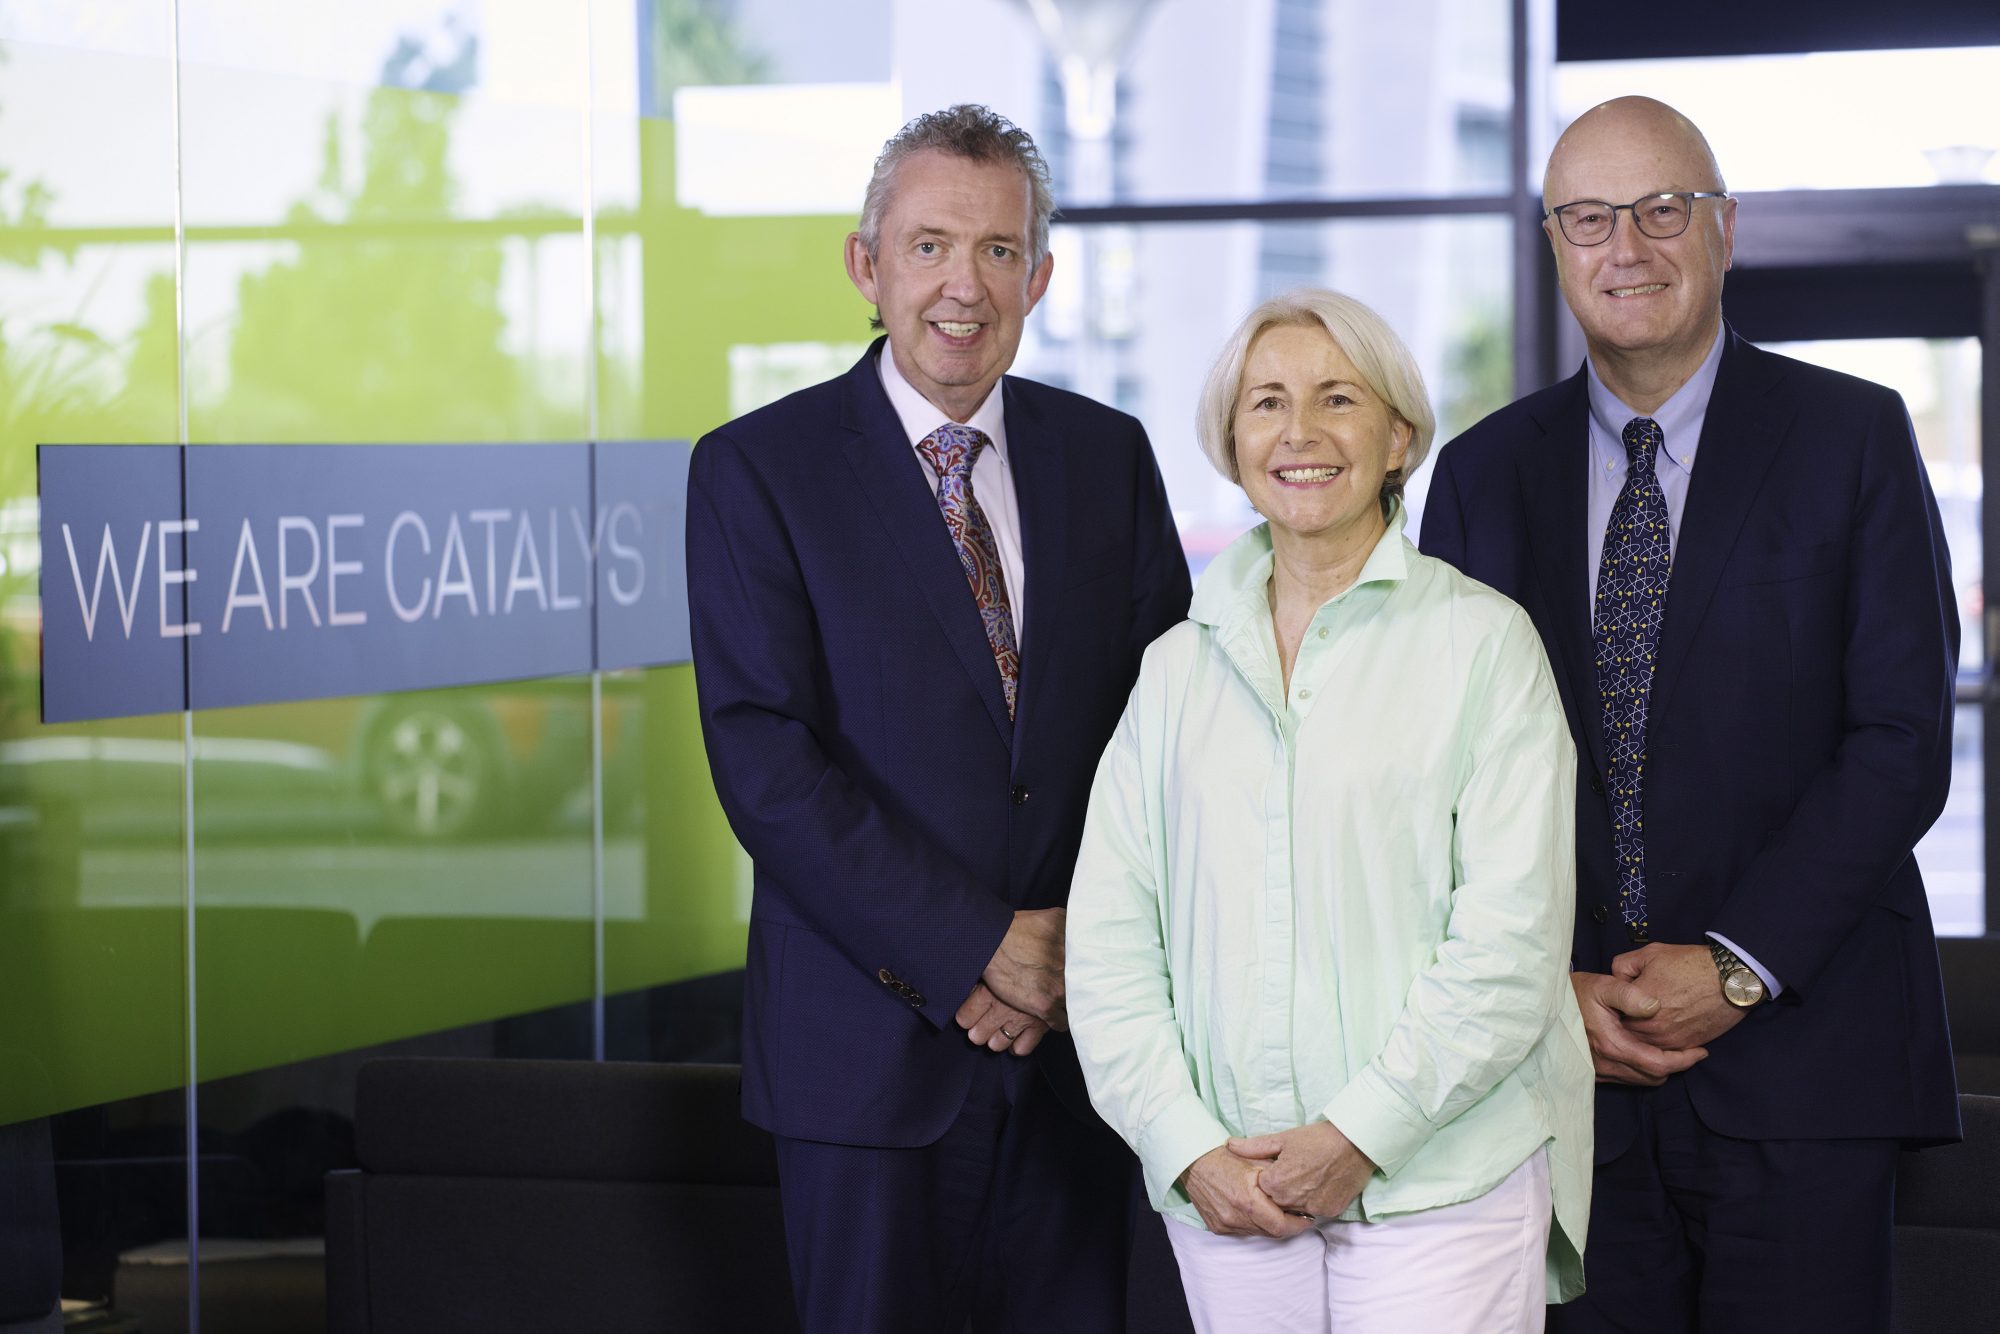 A picture of Catalyst's three new board members (Professor Mark W.J Ferguson, Jeanette Walker and Paul Harrington) standing together next to a branded, glass wall.